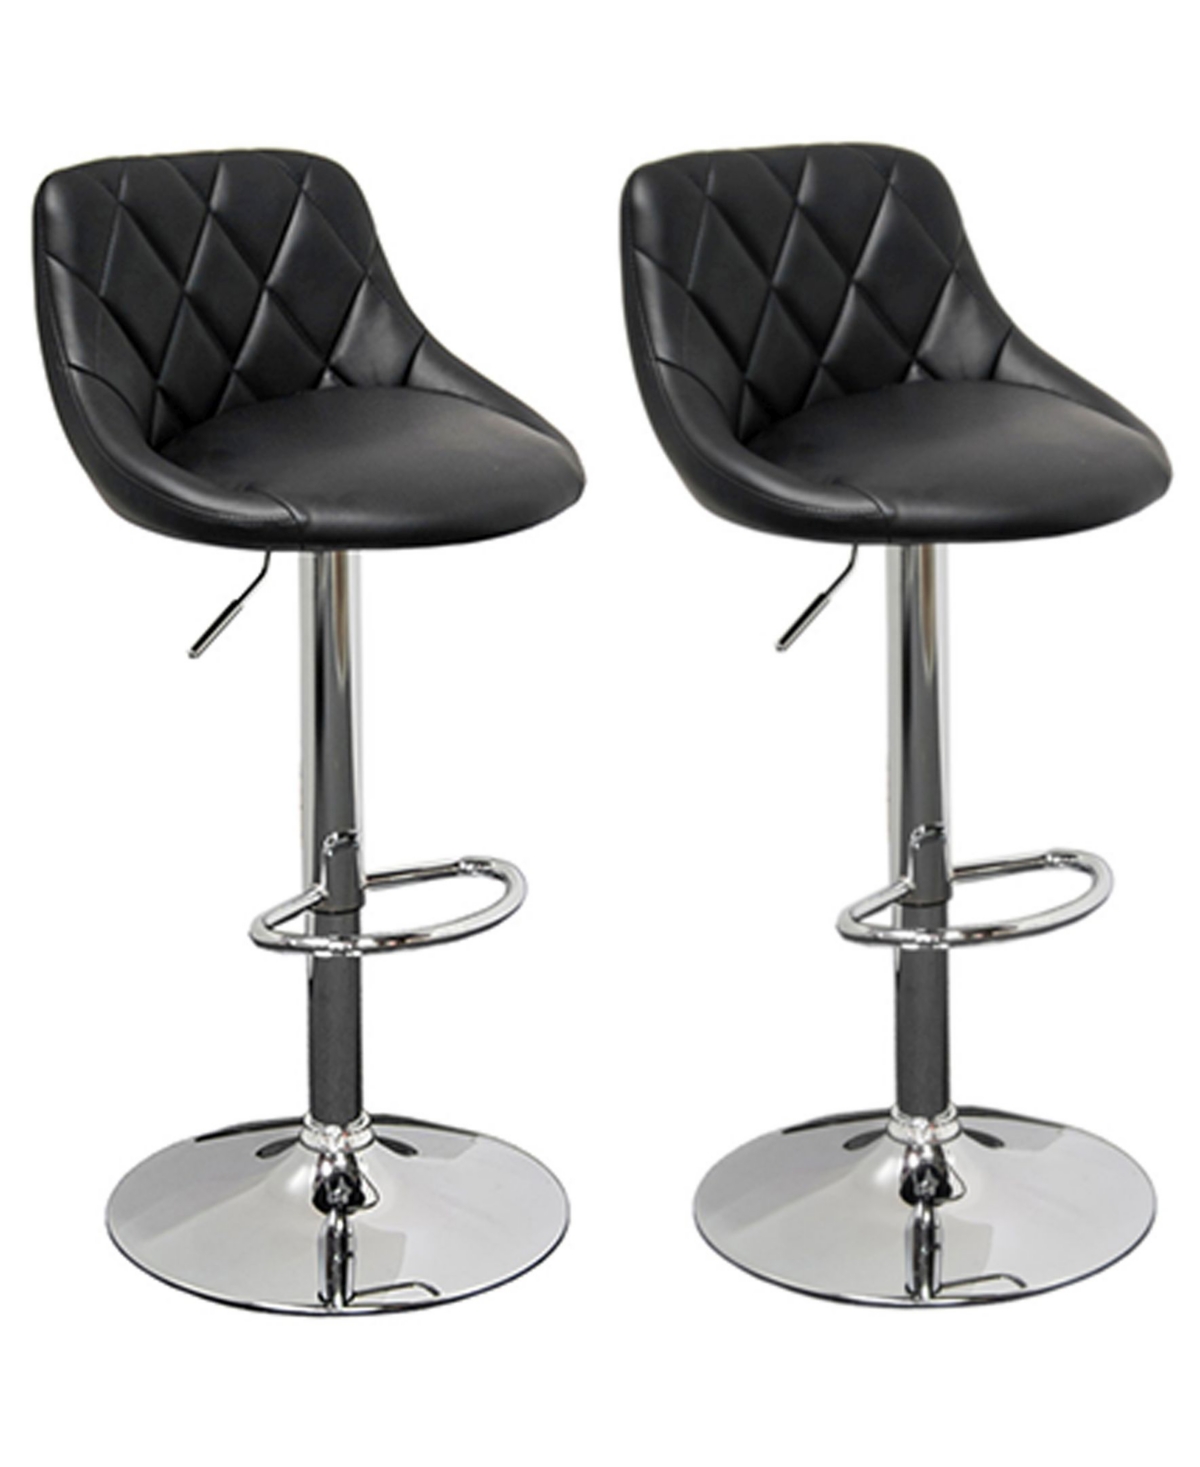 Claire Faux Leather Adjustable Swivel Bar Stools, Set of 2